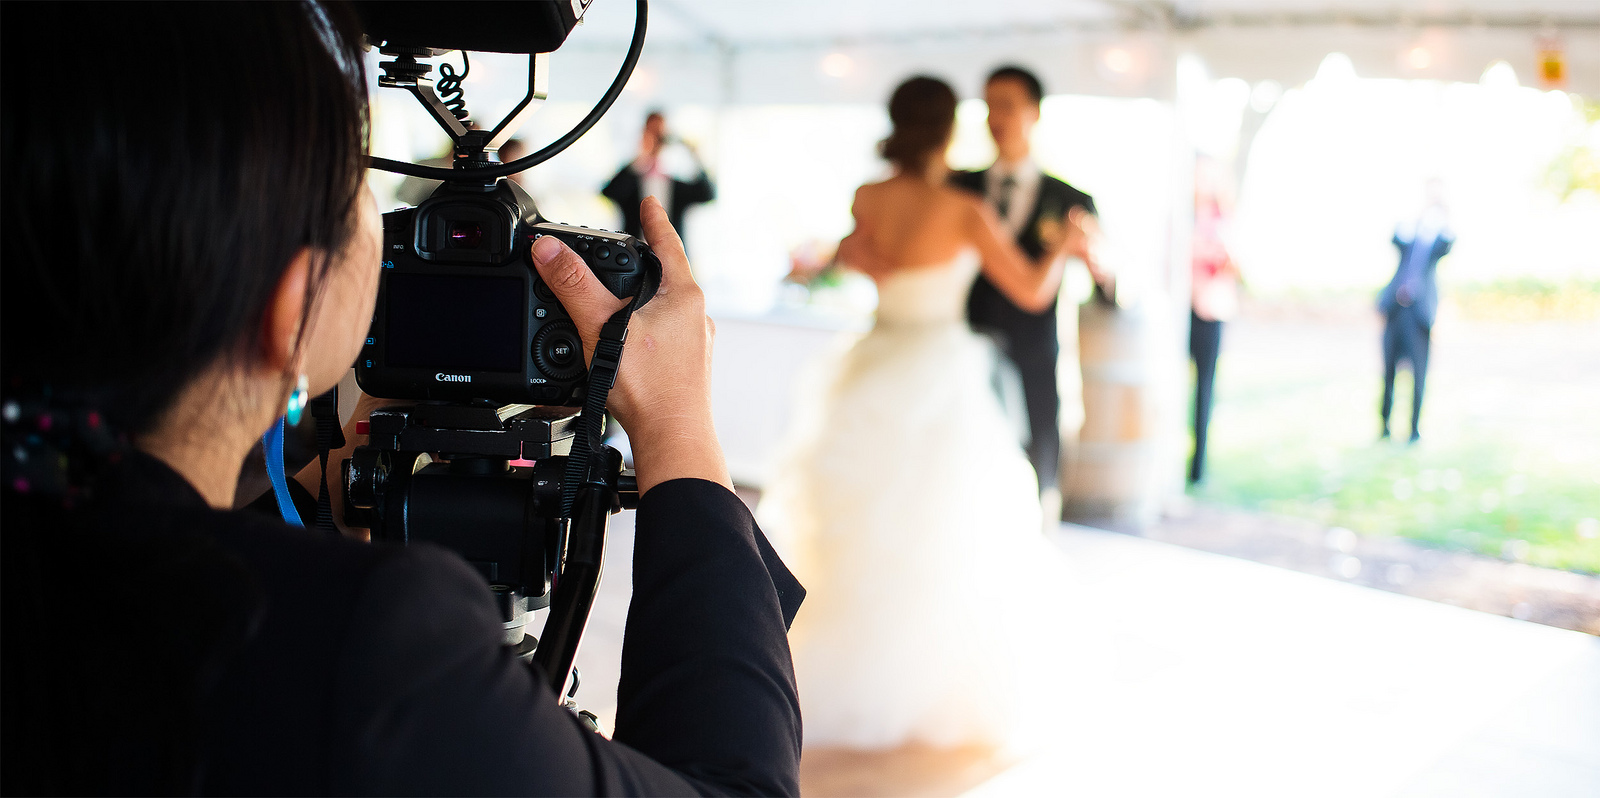 Questions to Ask Before Hiring A Wedding Videographer for Your Special Day